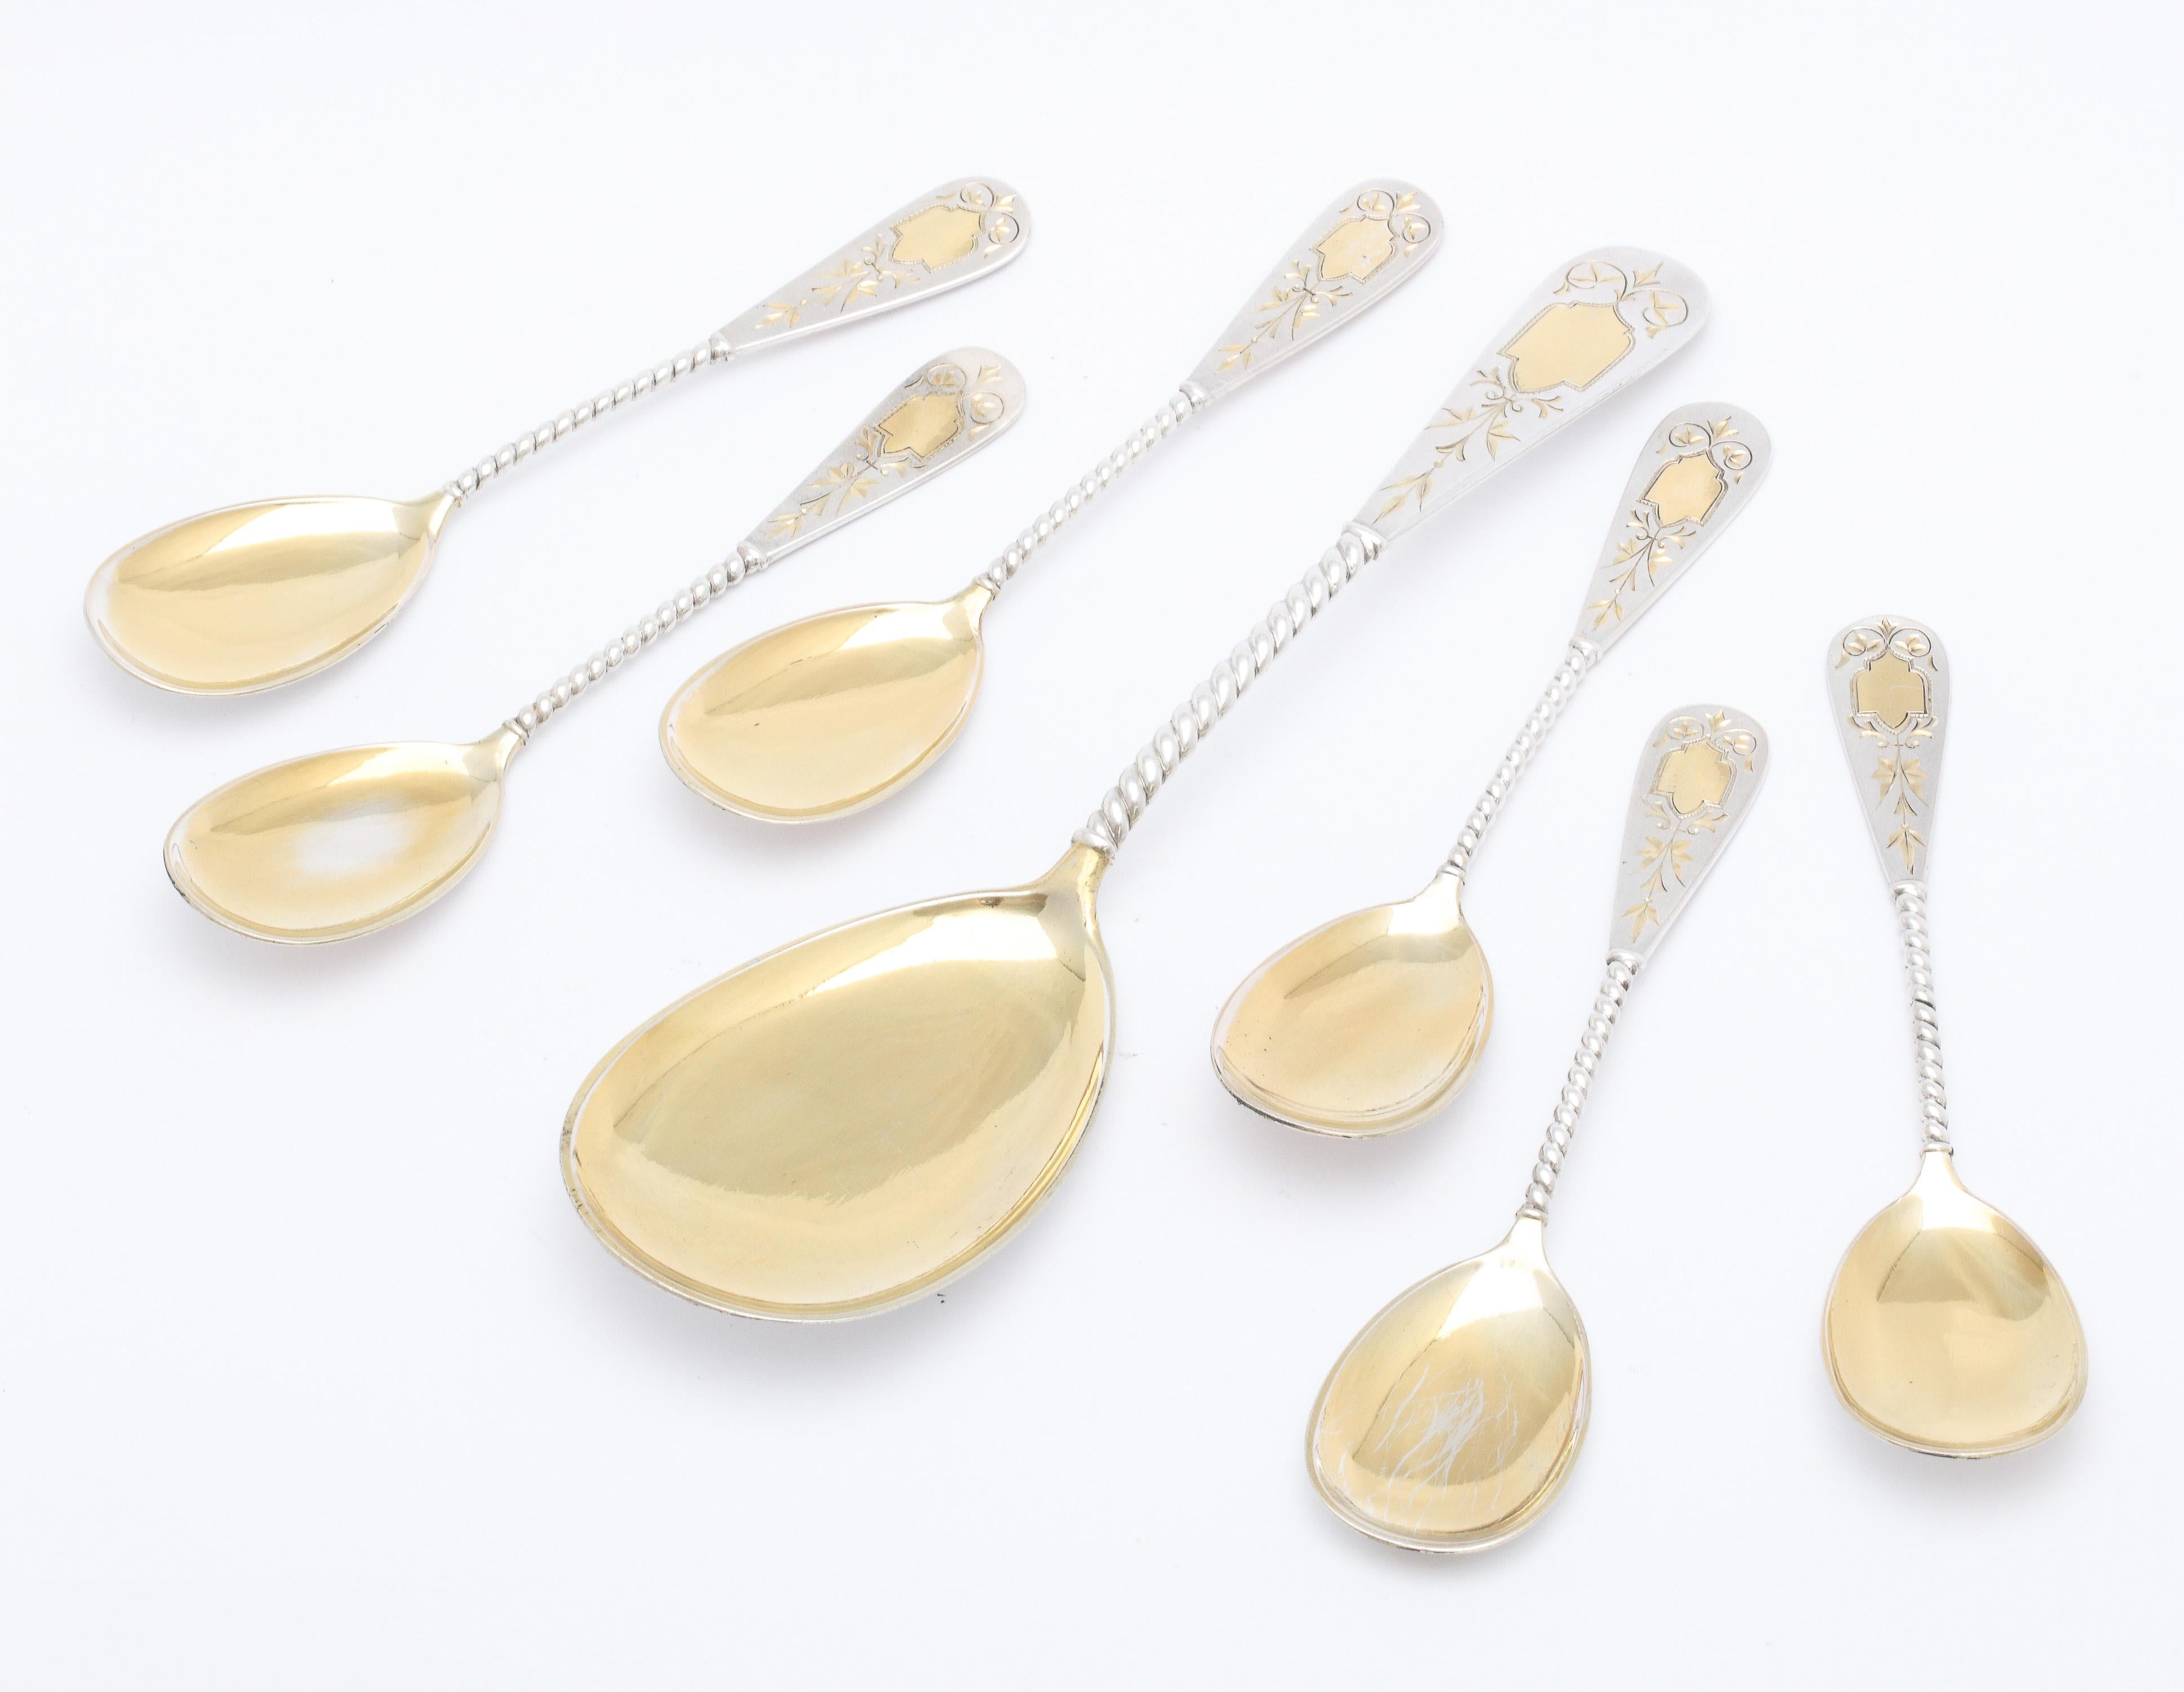 Edwardian Period, Continental silver (.800), parcel gilt ice cream /dessert set, Germany, ca. 1910. Set consists of a large serving spoon which is 8 inches long x 2 1/8 inches deep (at deepest point)  and 6 eating spoons, each measuring 5 1/4 inches